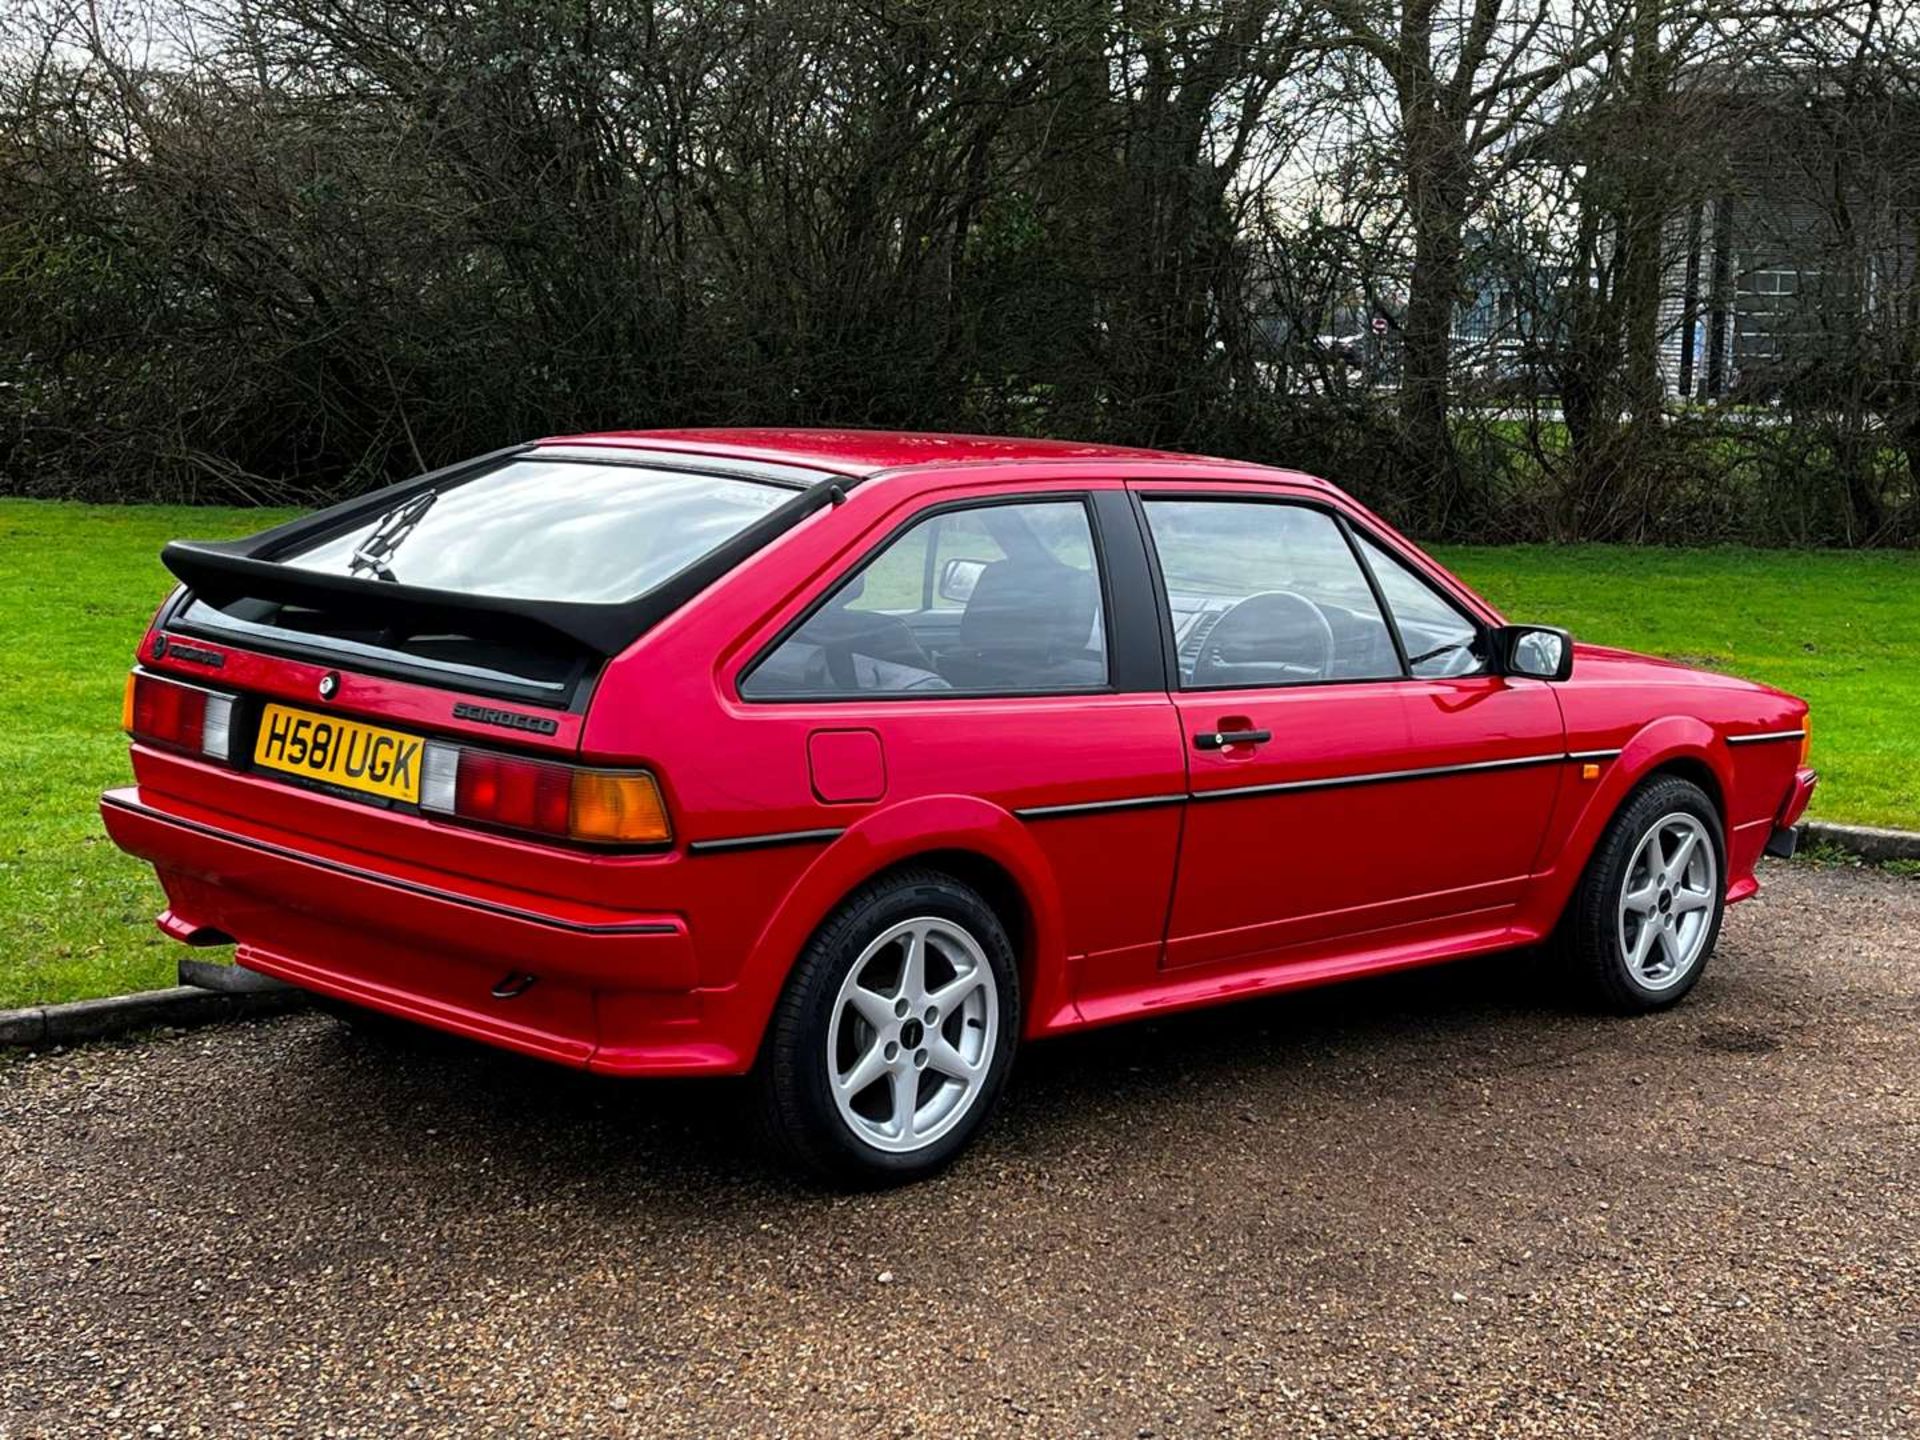 1990 VW SCIROCCO 1.8 GT - Image 6 of 29